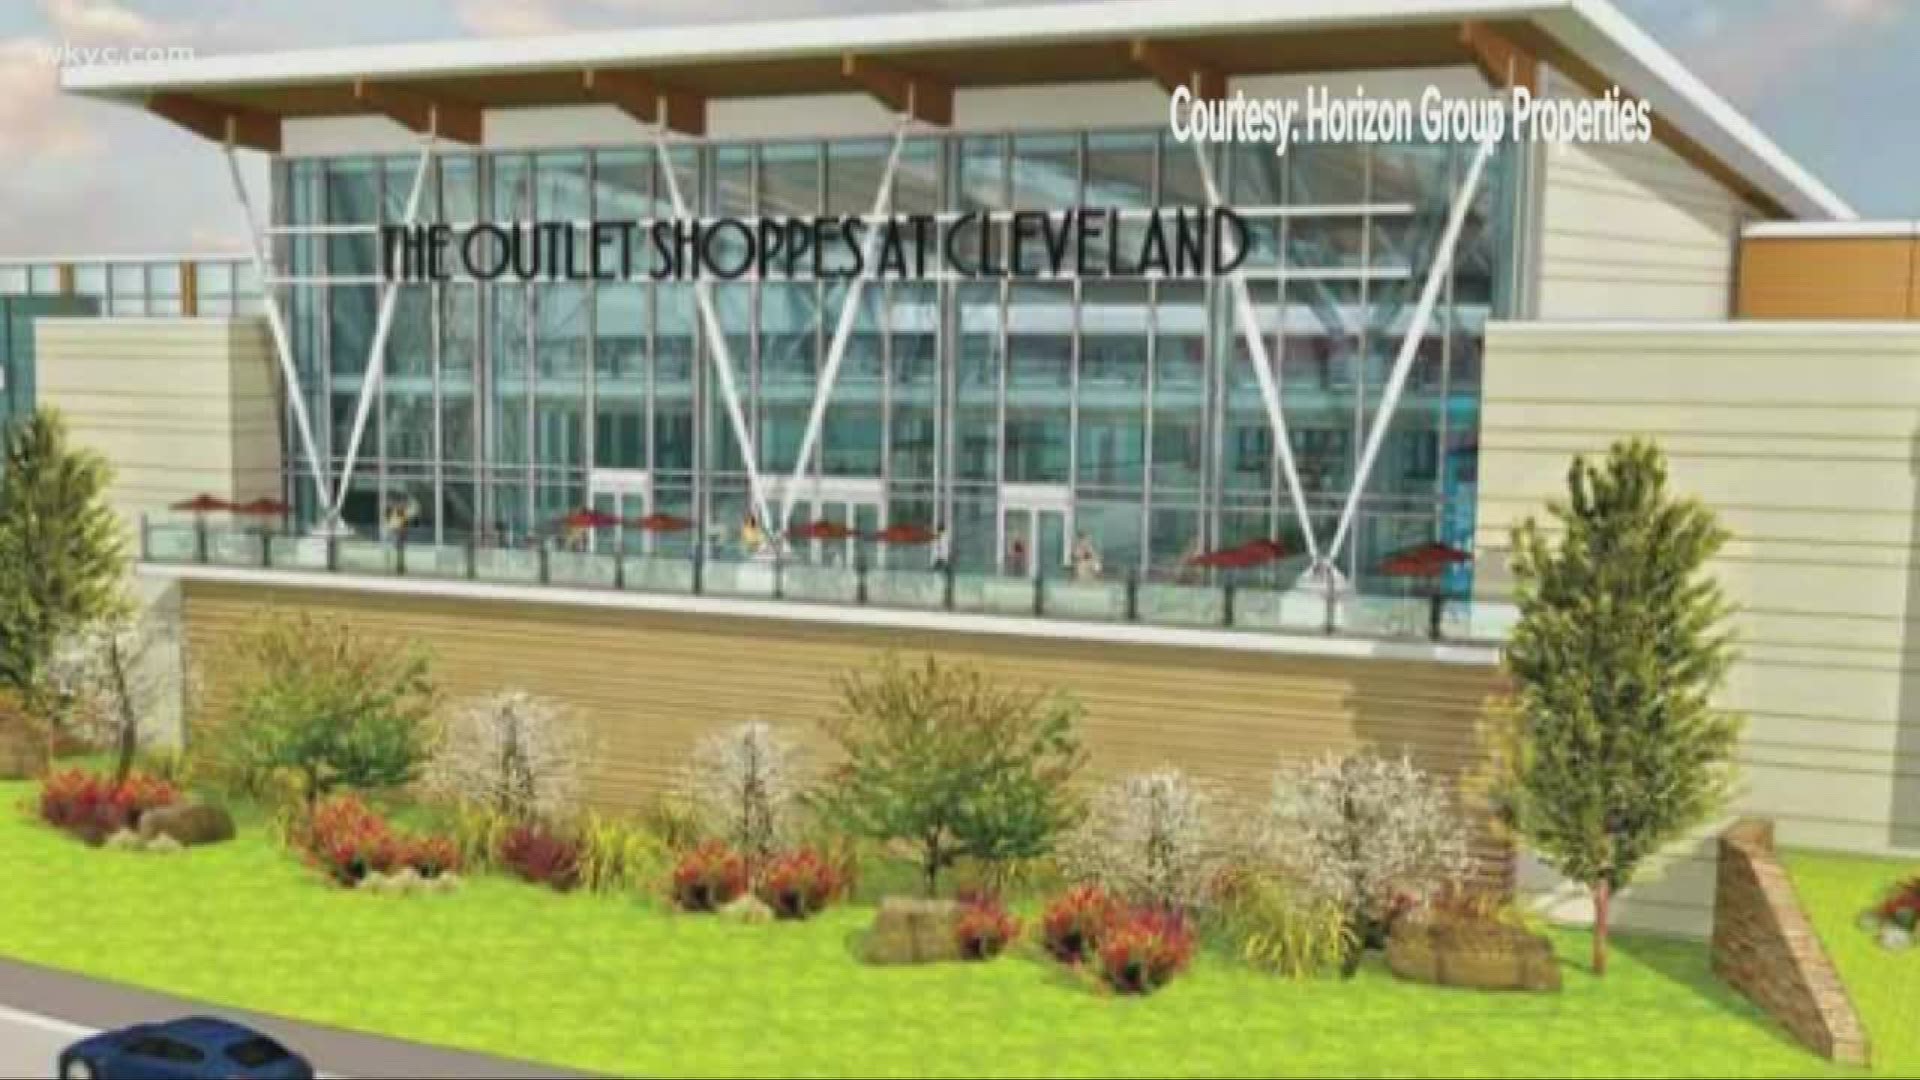 The idea was originally proposed for the north side of the Shoreway several years ago, but then as well as now, council members are concerned about sustainability.